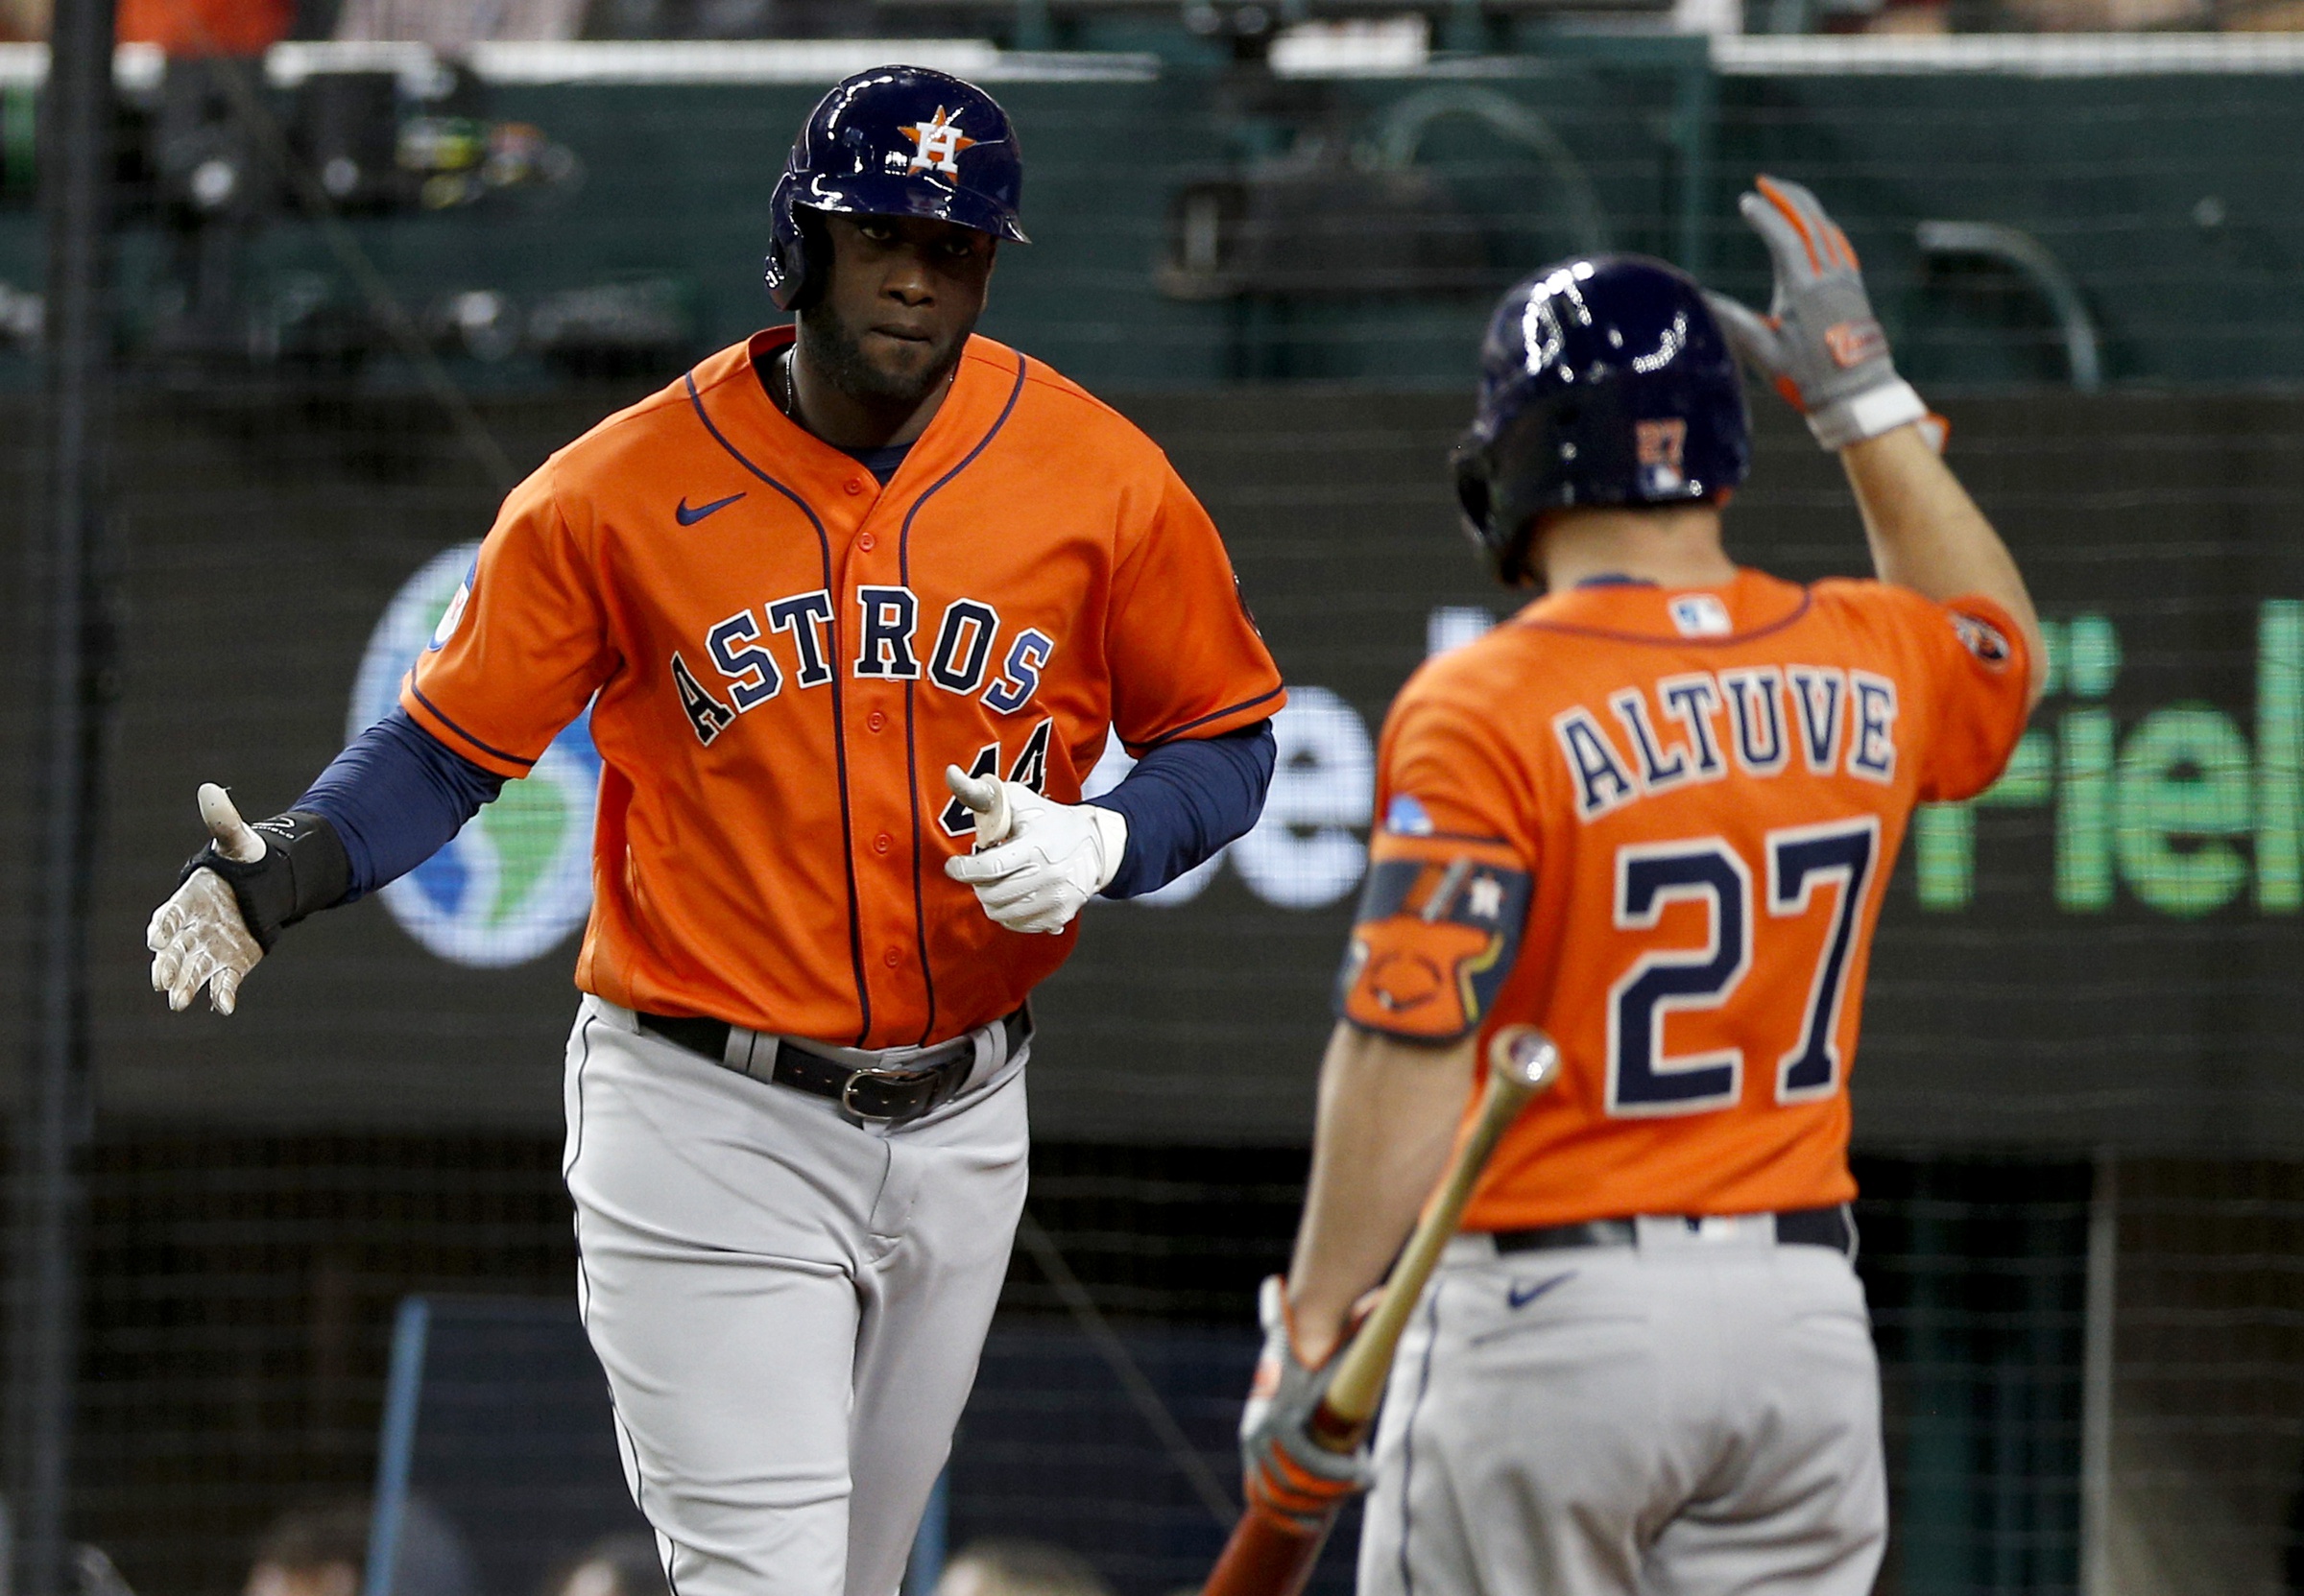 Alvarez has 2 HRs in return to lead Astros over Angels